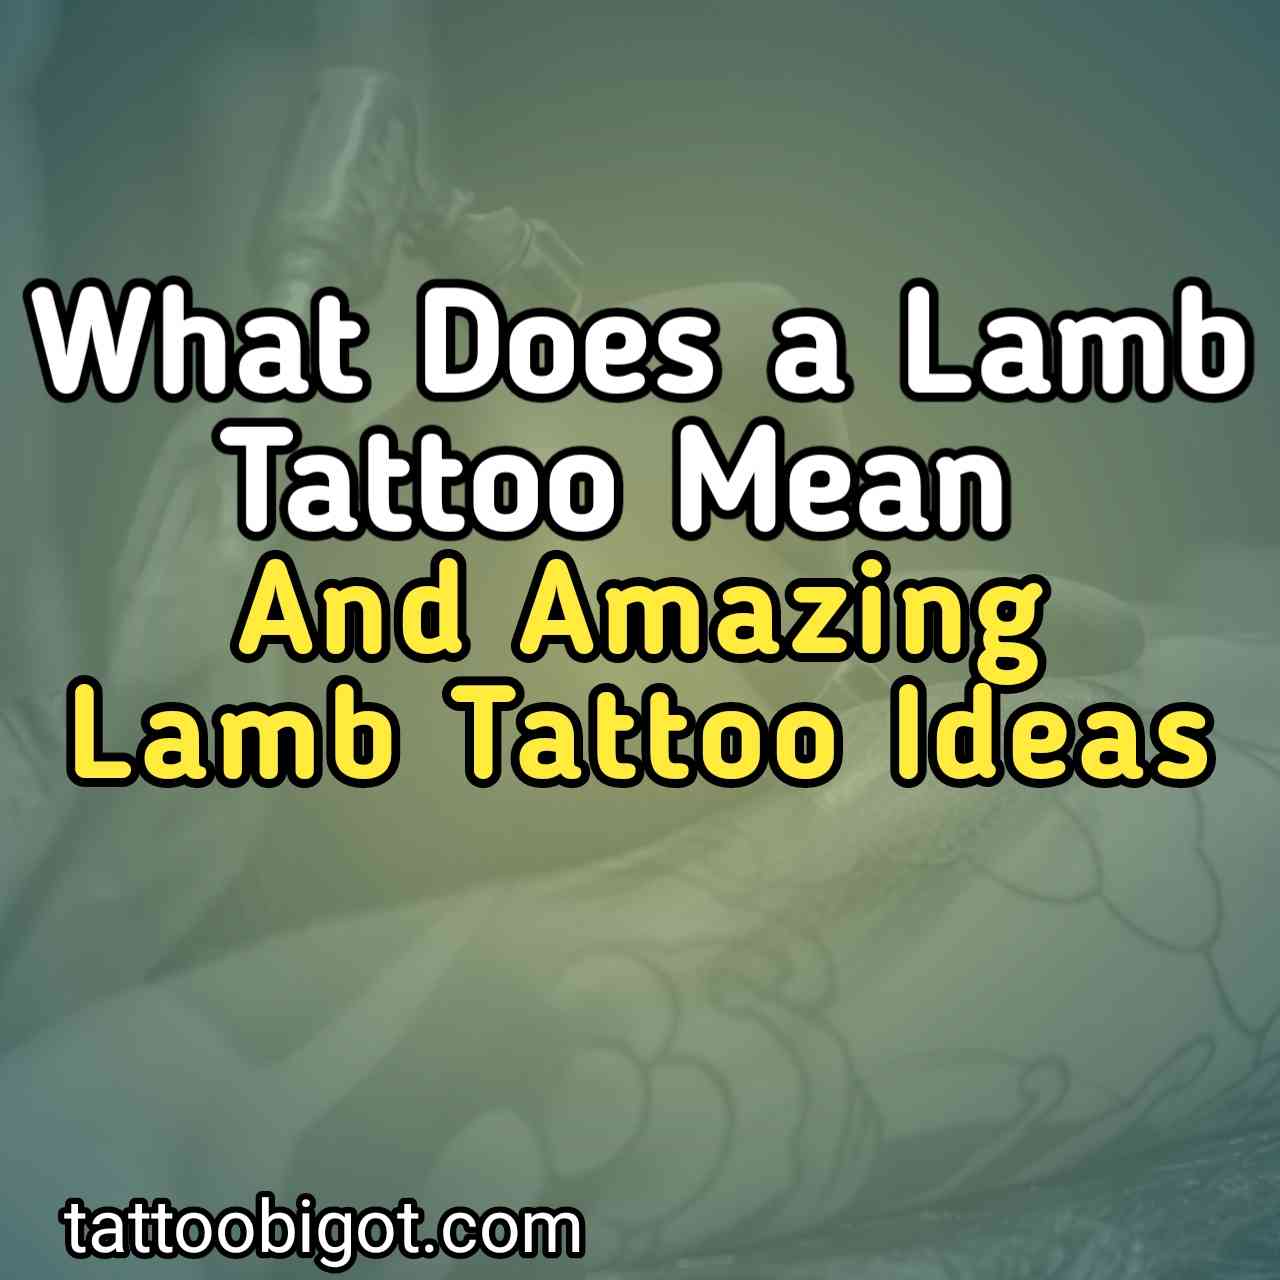 What does a Lamb Tattoo Mean